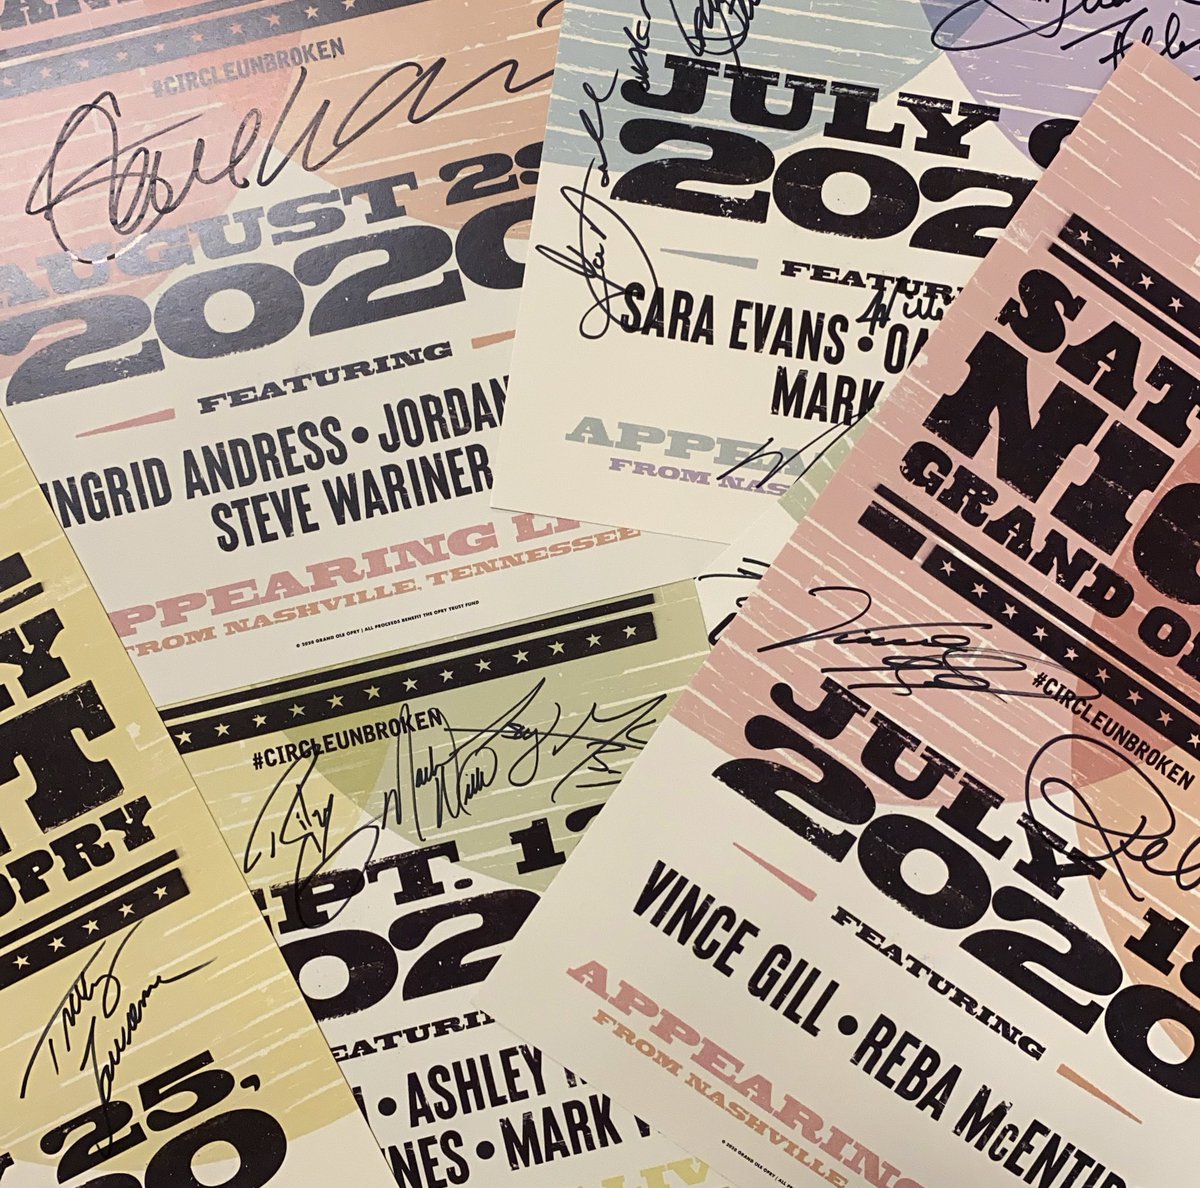 We’re giving you the chance to win a poster signed by some of our 2020 Opry performers! To win, tag a friend below. Extra entries if you RT and follow us! ✨